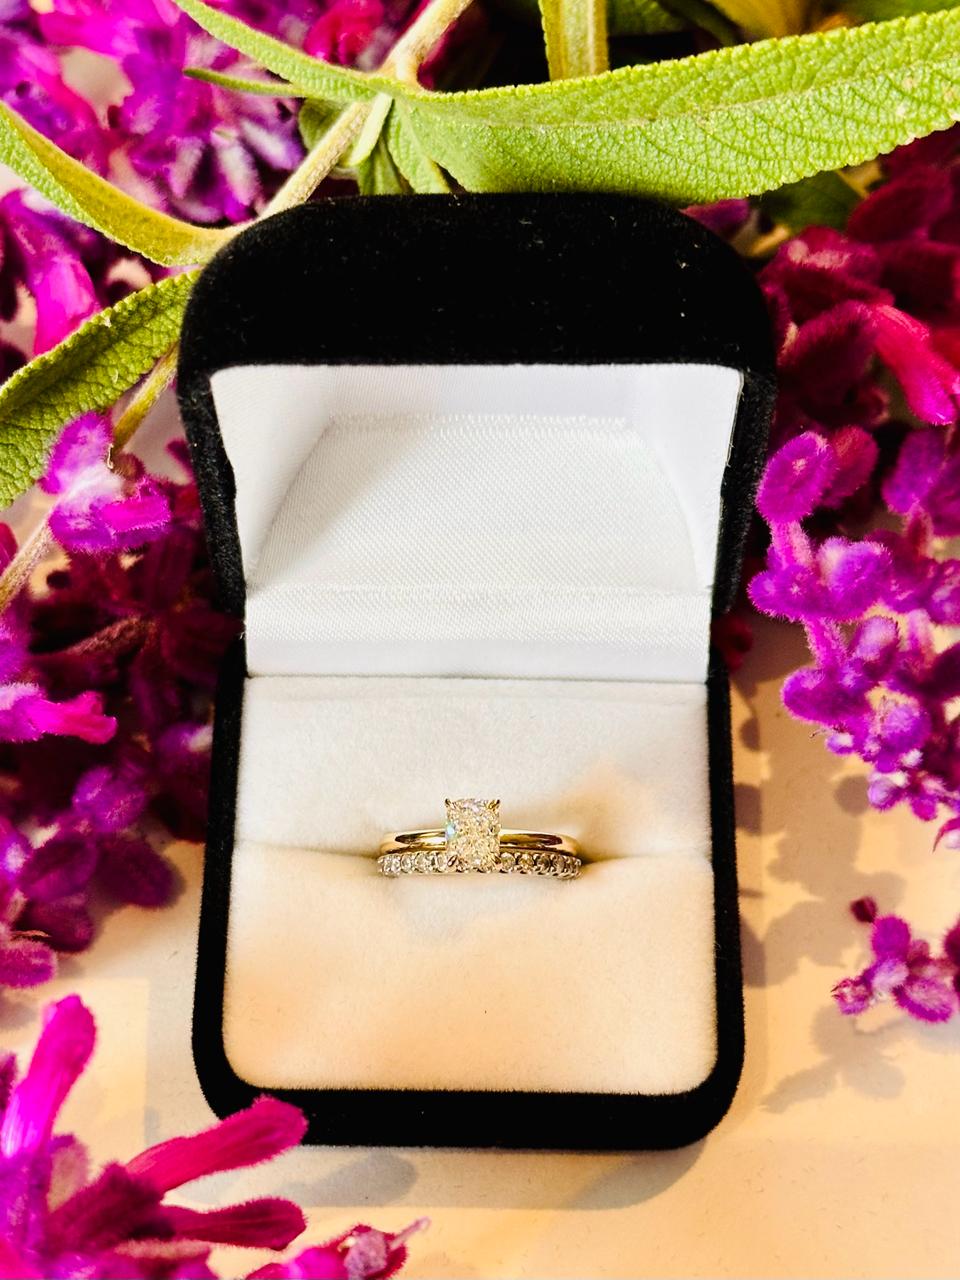 Diamond Engagement Ring with Diamond Wedding Band in Ring Box